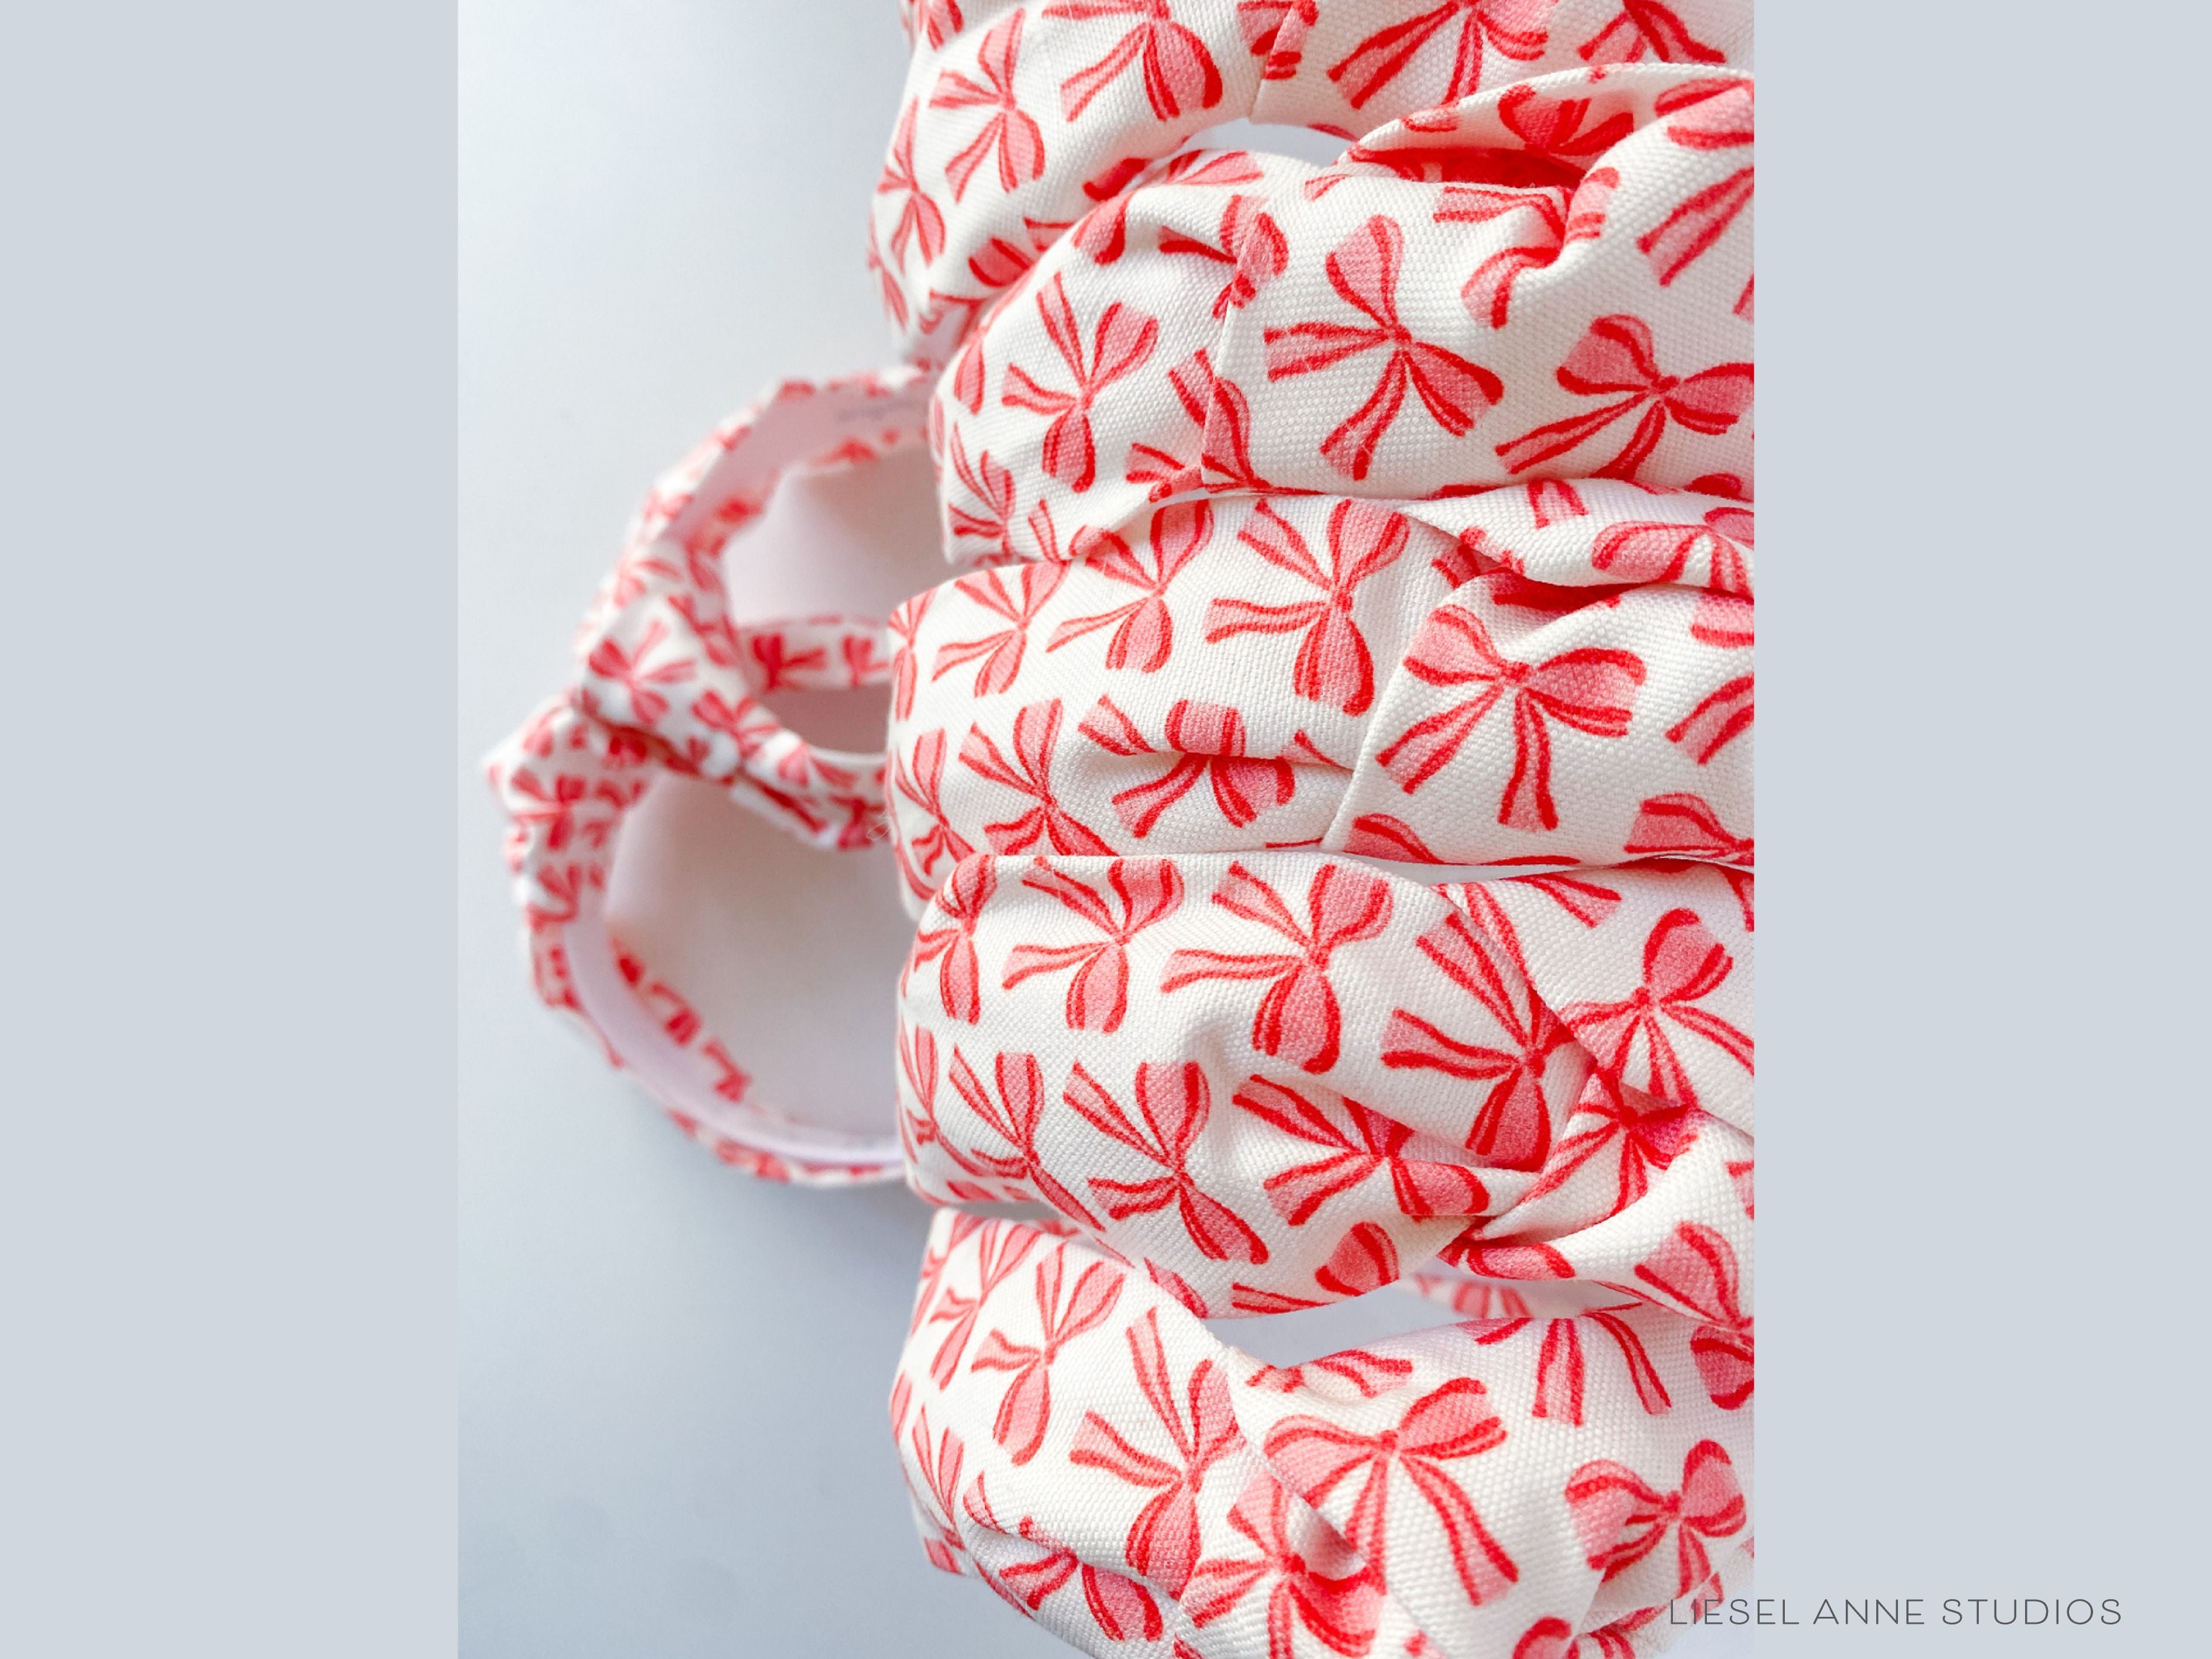 Red Bow Top Knot Headband-These fabric headbands make unique one-of-a-kind gifts as each one is slightly different. They are cut from our hand-painted signature print. These are the perfect accessory and make great gifts!-The Singing Little Bird